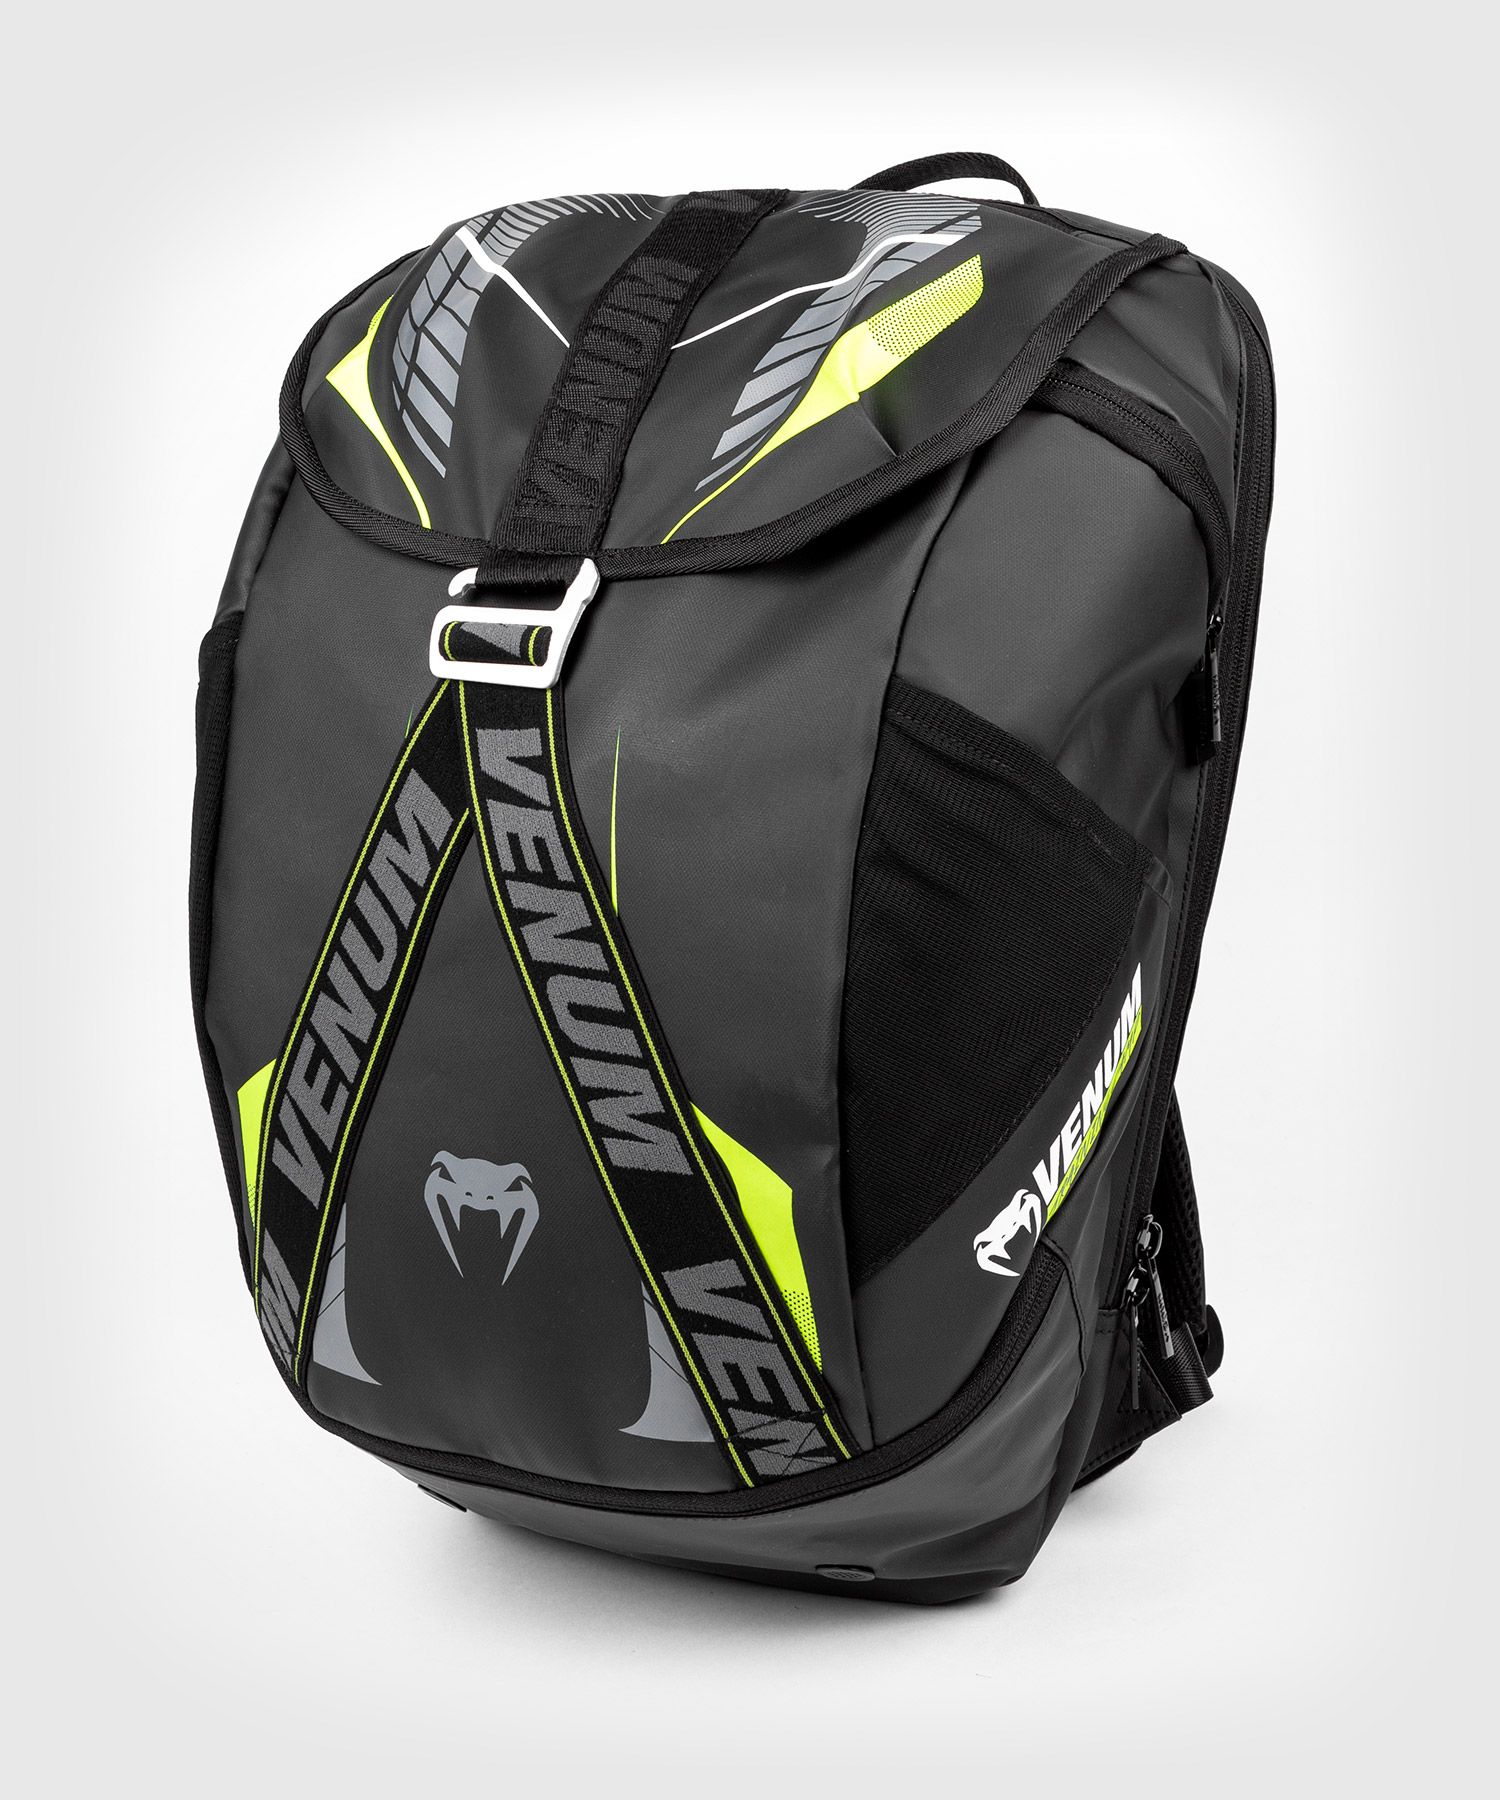 VTC 3 Backpack Turtle - Black/Neo Yellow